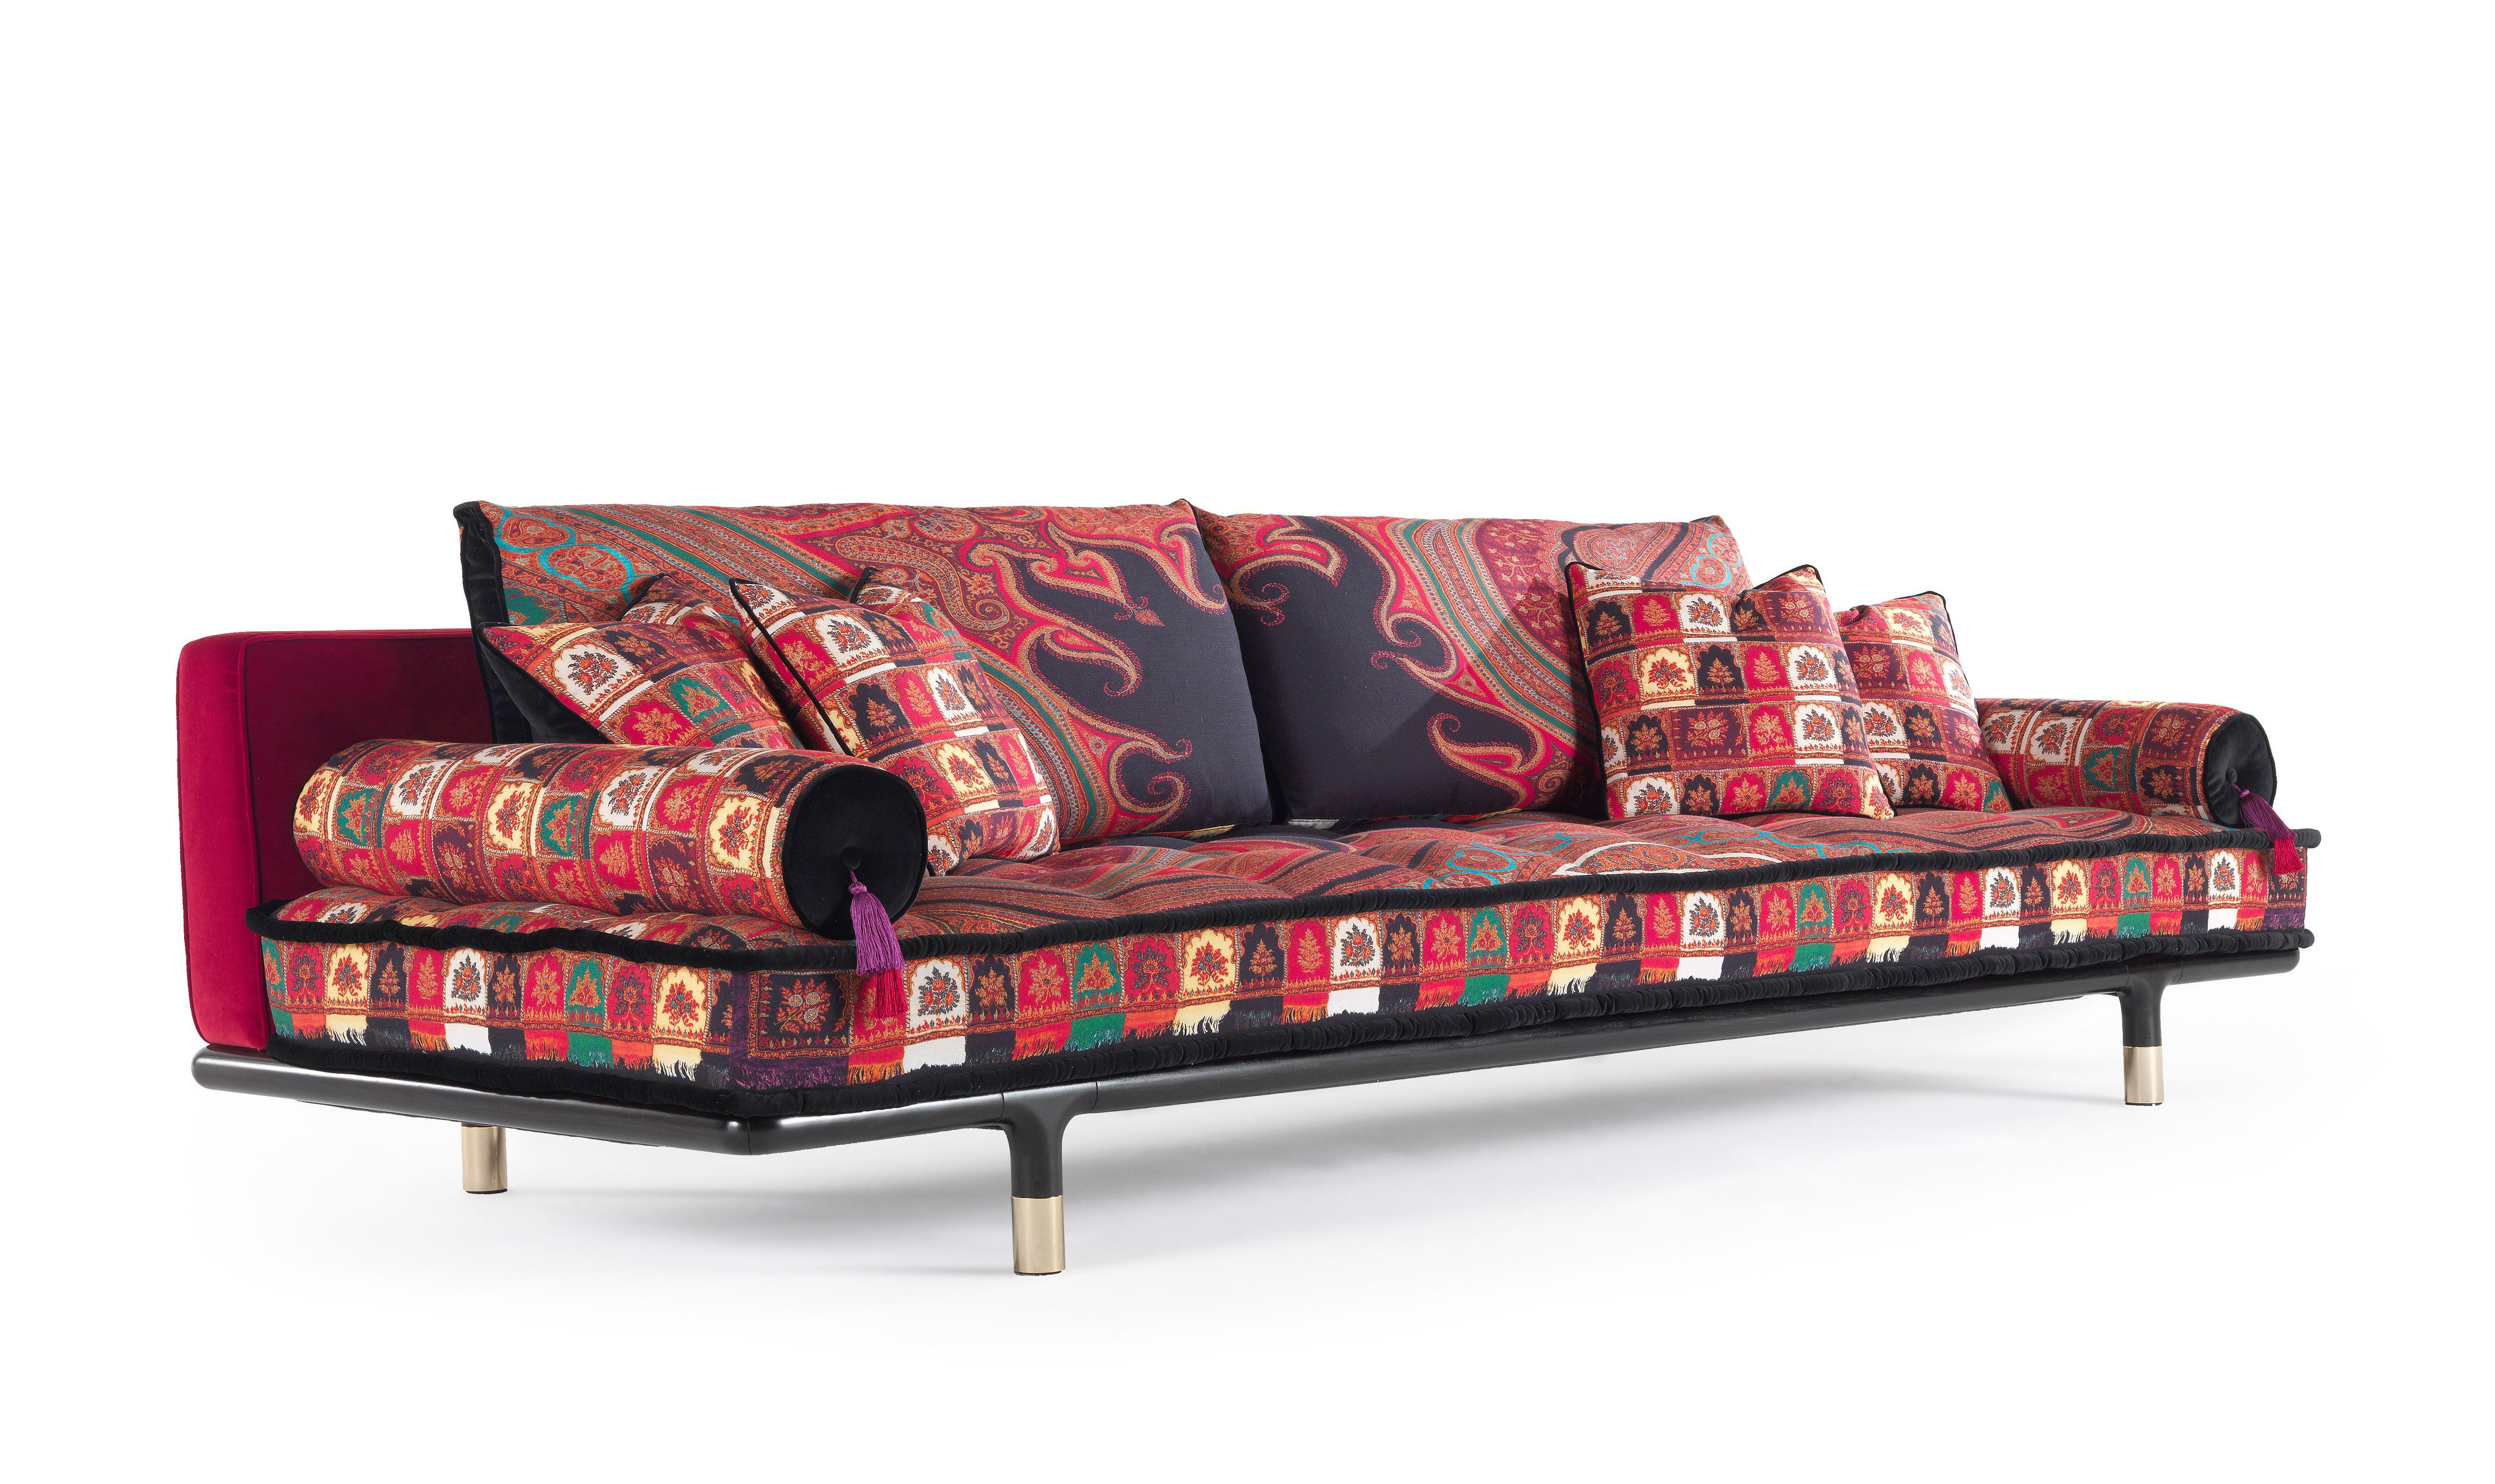 A sofa with a welcoming and comfortable look, emphasized by the mattress conformation of the seat. Refined details such as the polished brass tips of the basement and the roll cushions with decorative tassels enhance the whole effect, showing the